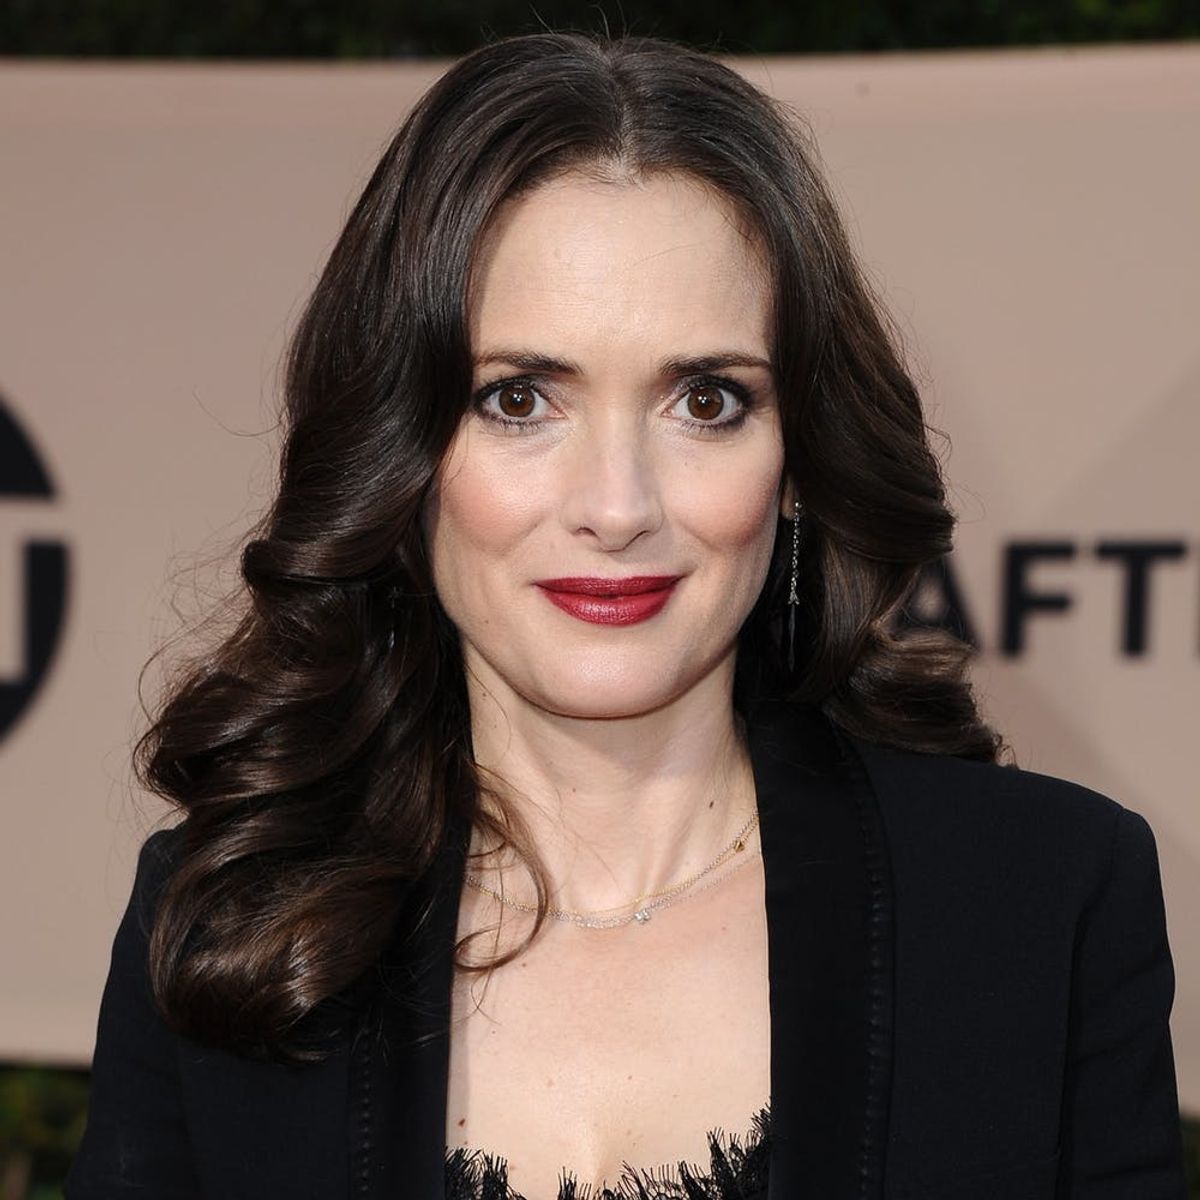 Winona Ryder Reveals She Had a Childhood Crush on This ‘Stranger Things’ Costar